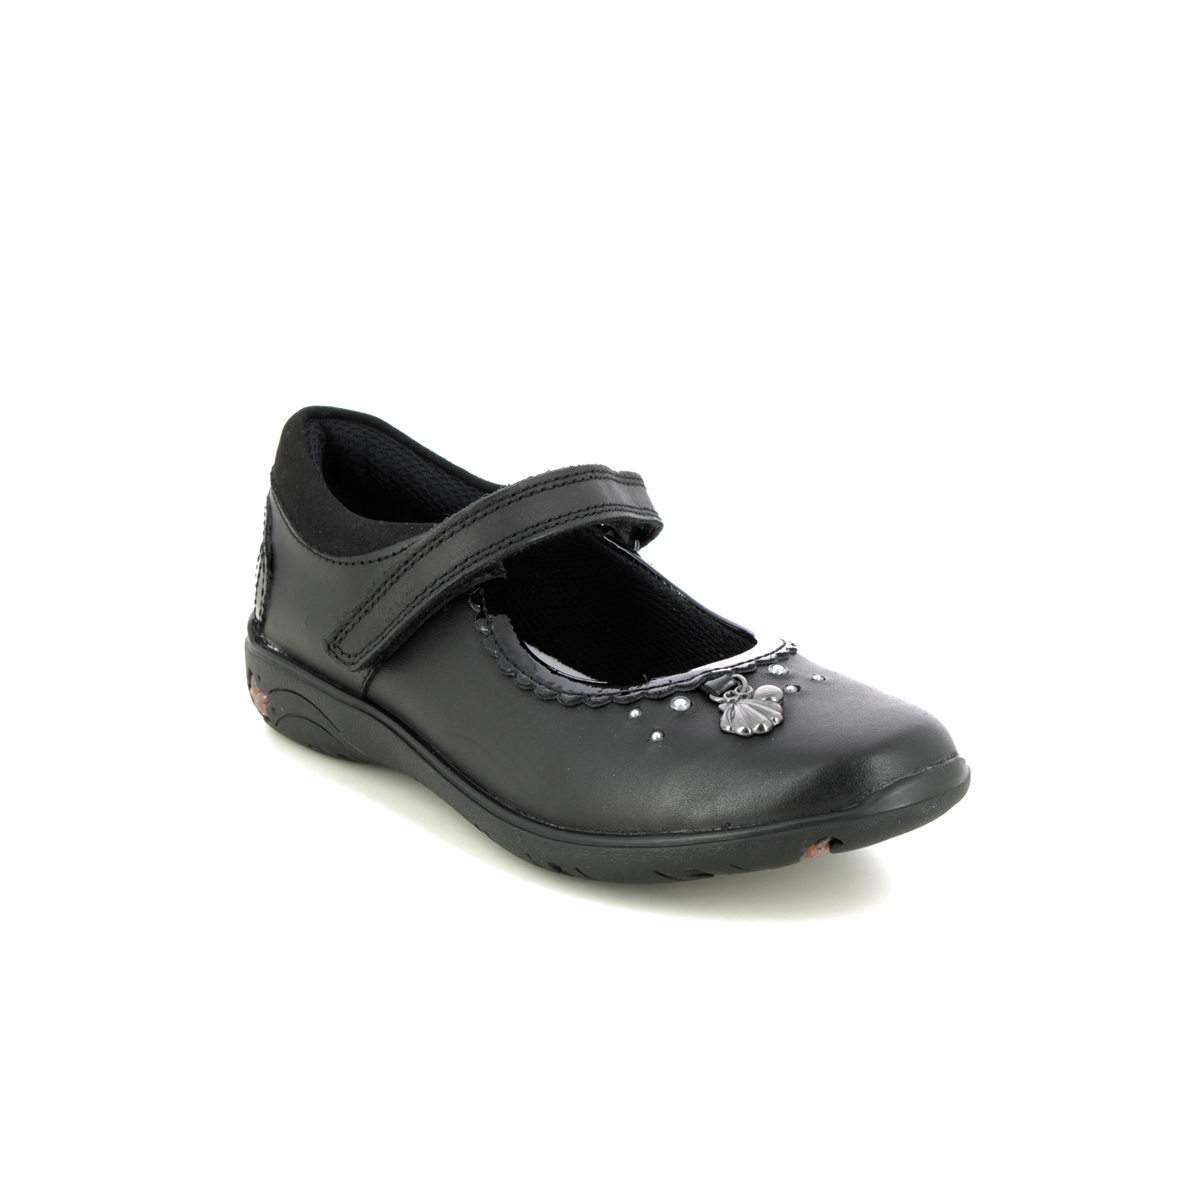 Clarks Sea Shimmer K Black leather Kids girls school shoes 5554-26F in a Plain Leather in Size 13